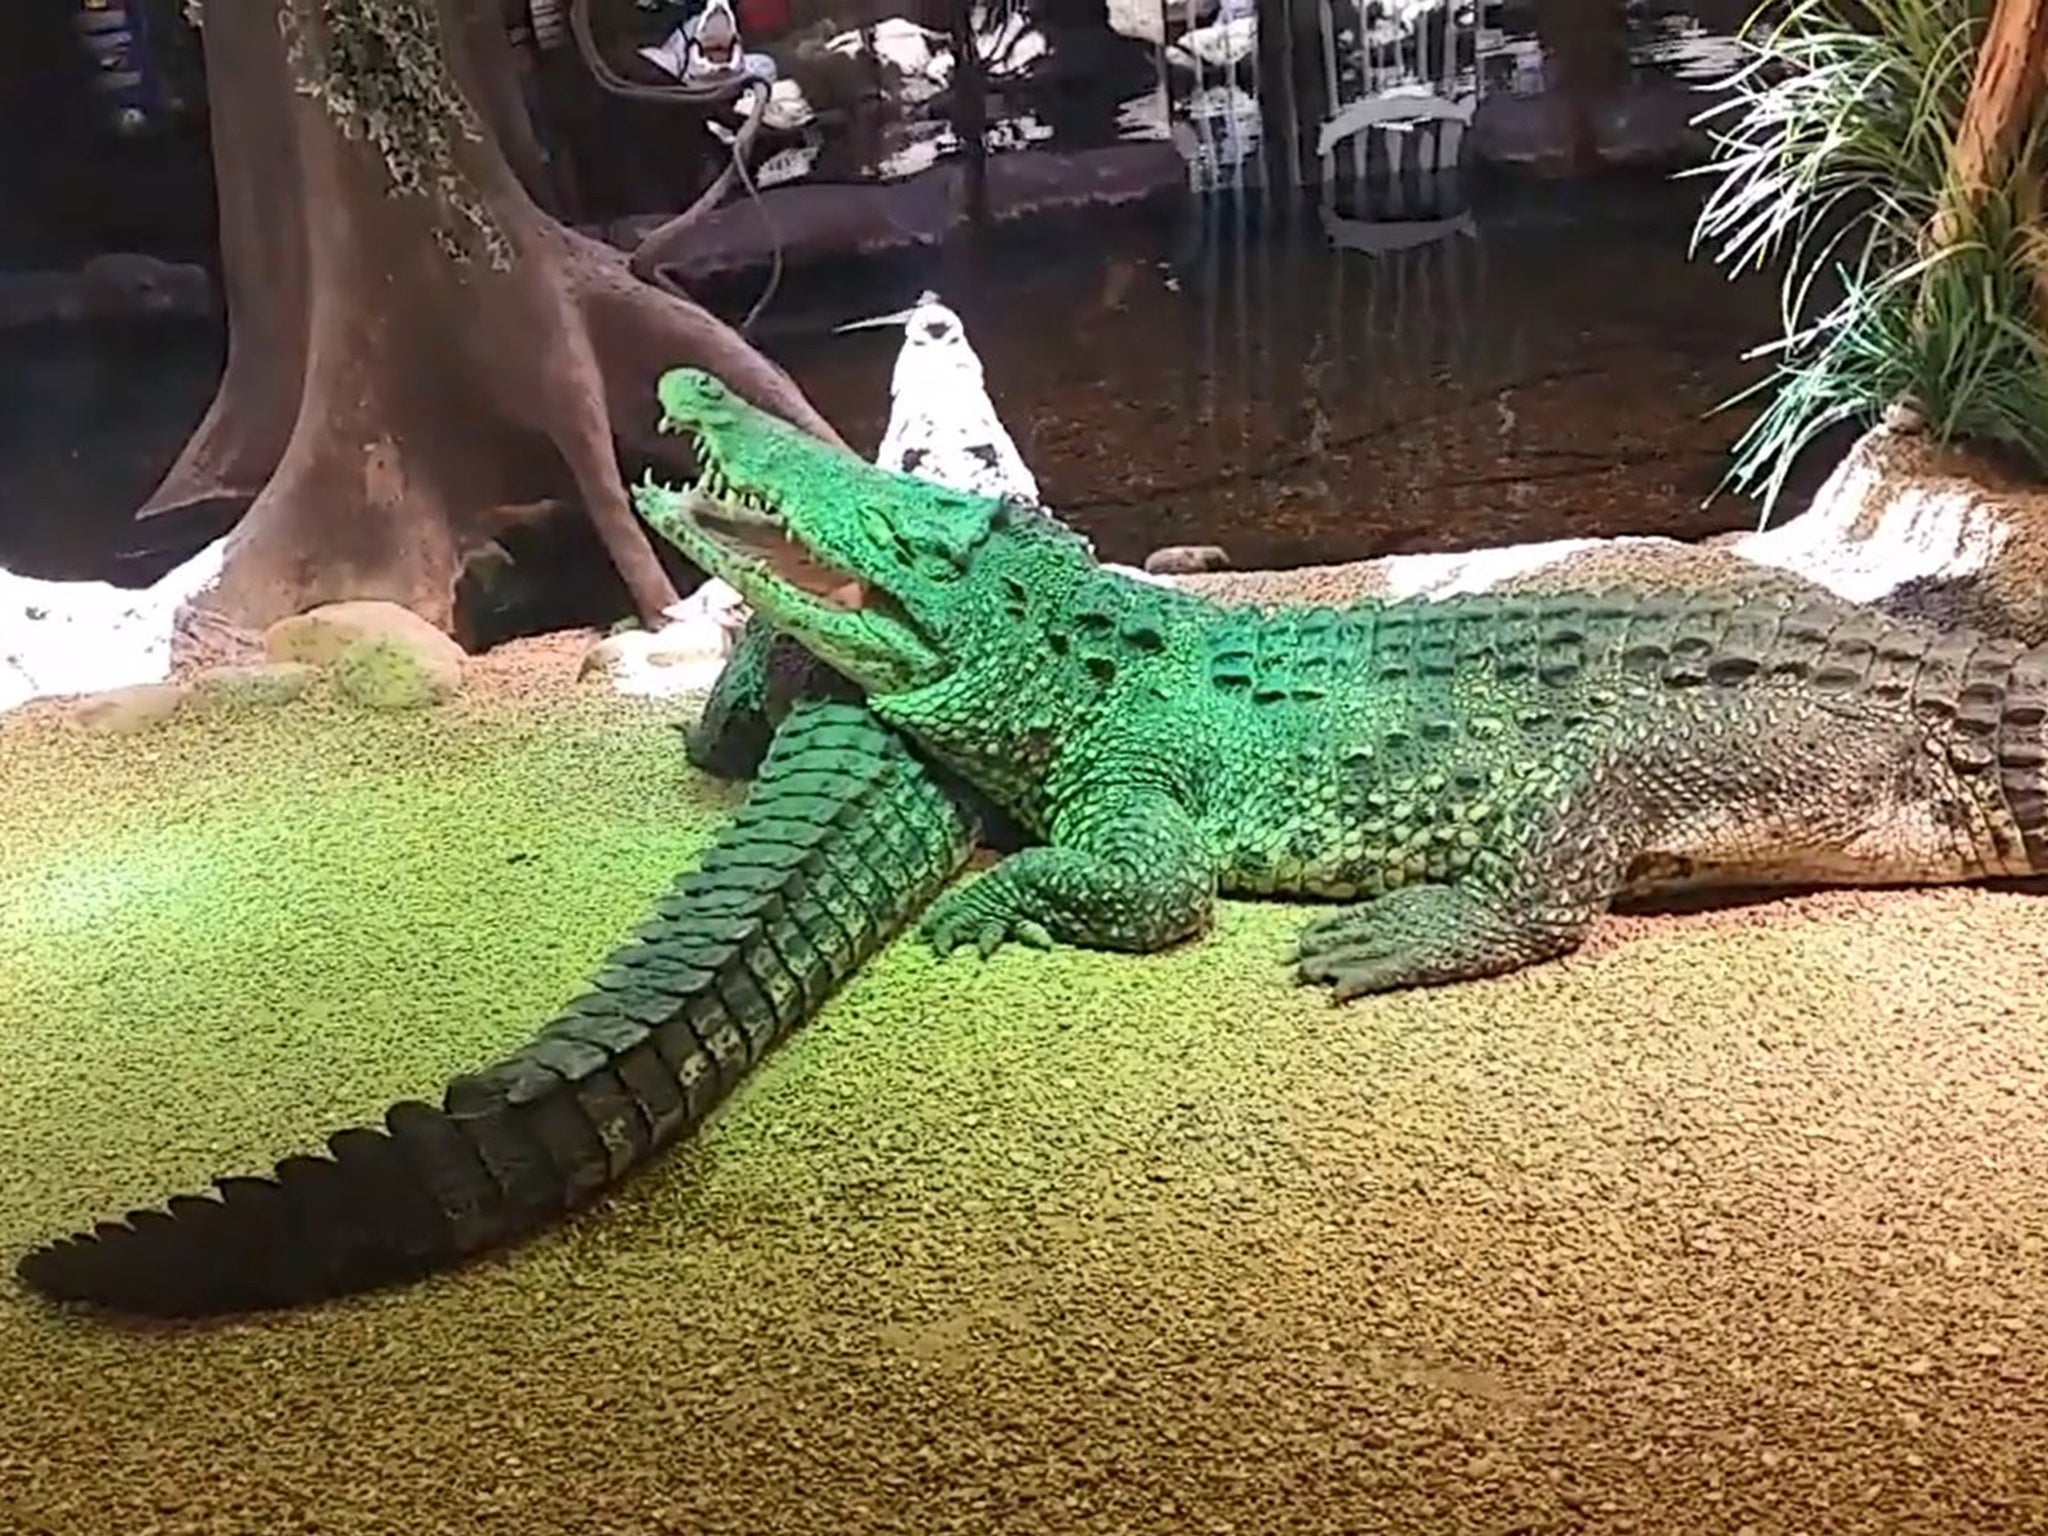 The crocodiles lay in their enclosure